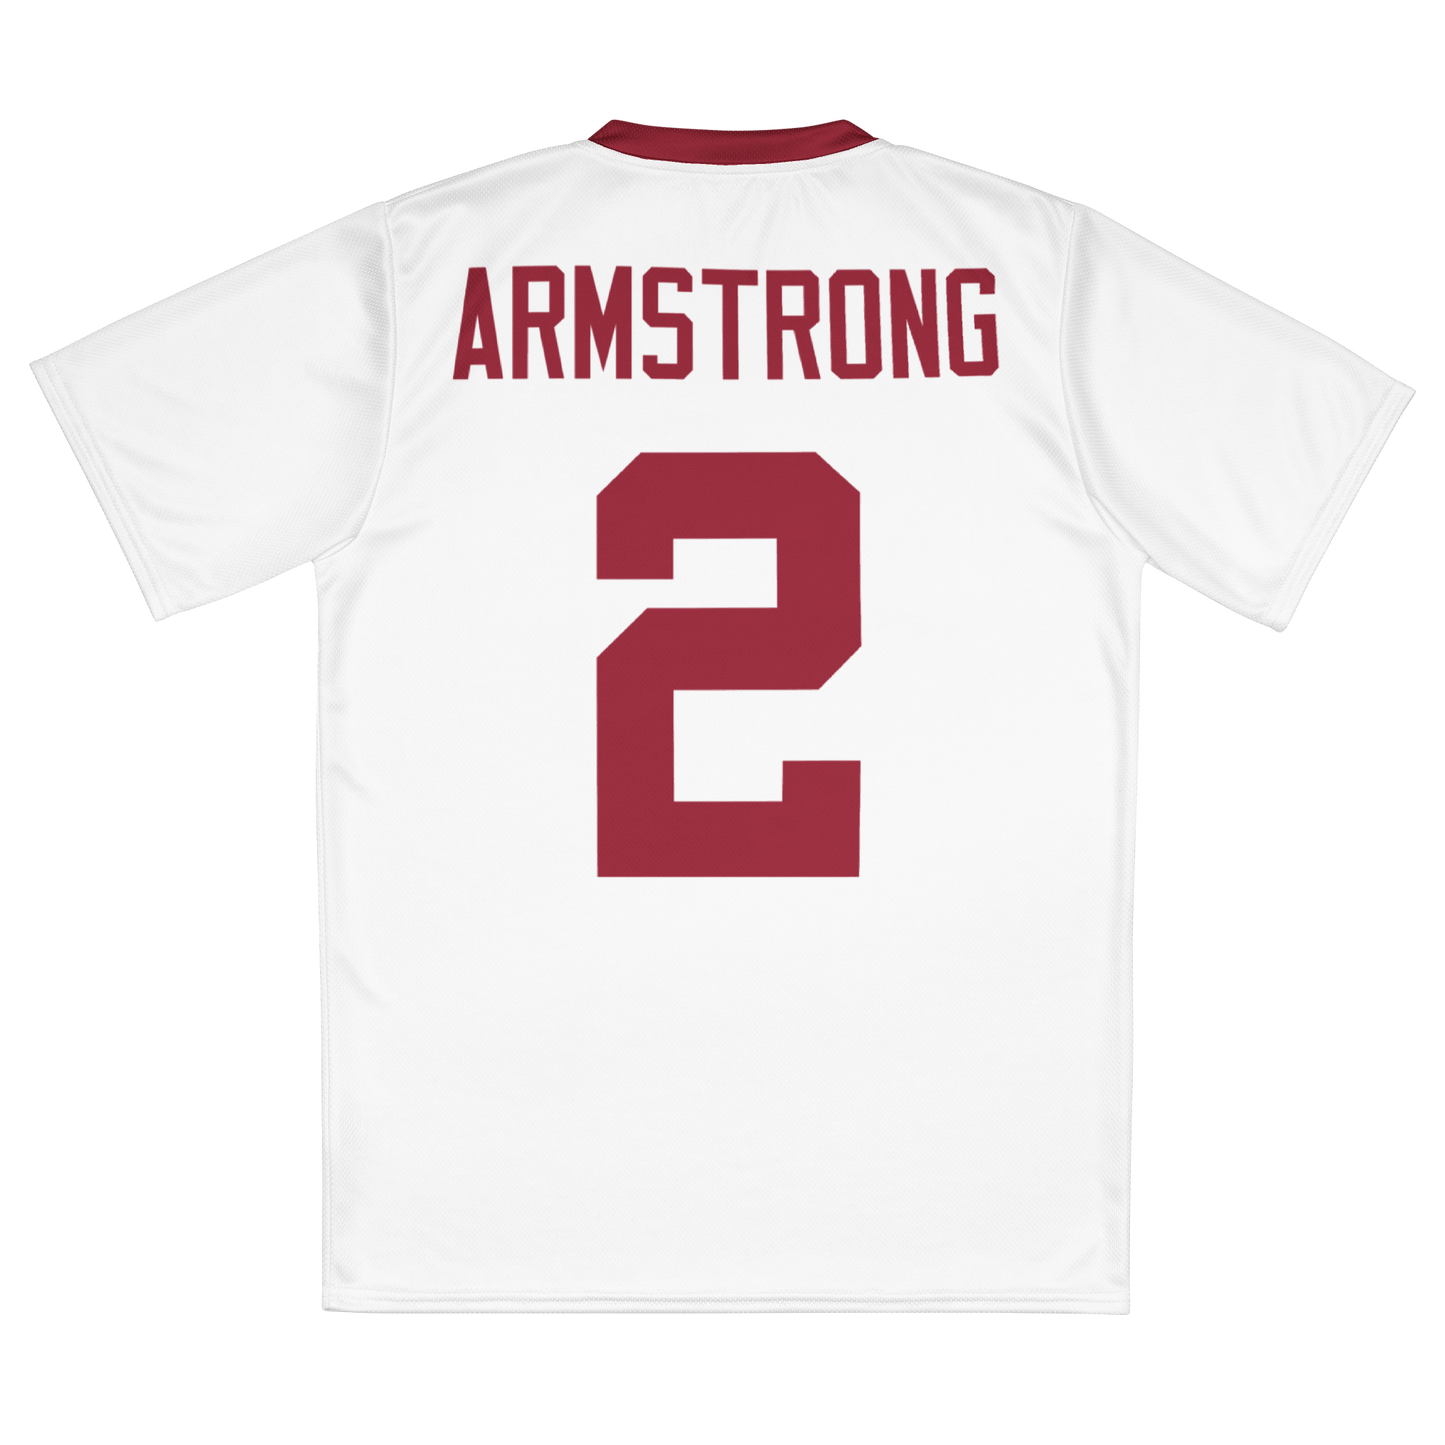 ARMSTRONG AWAY SHIRTSY